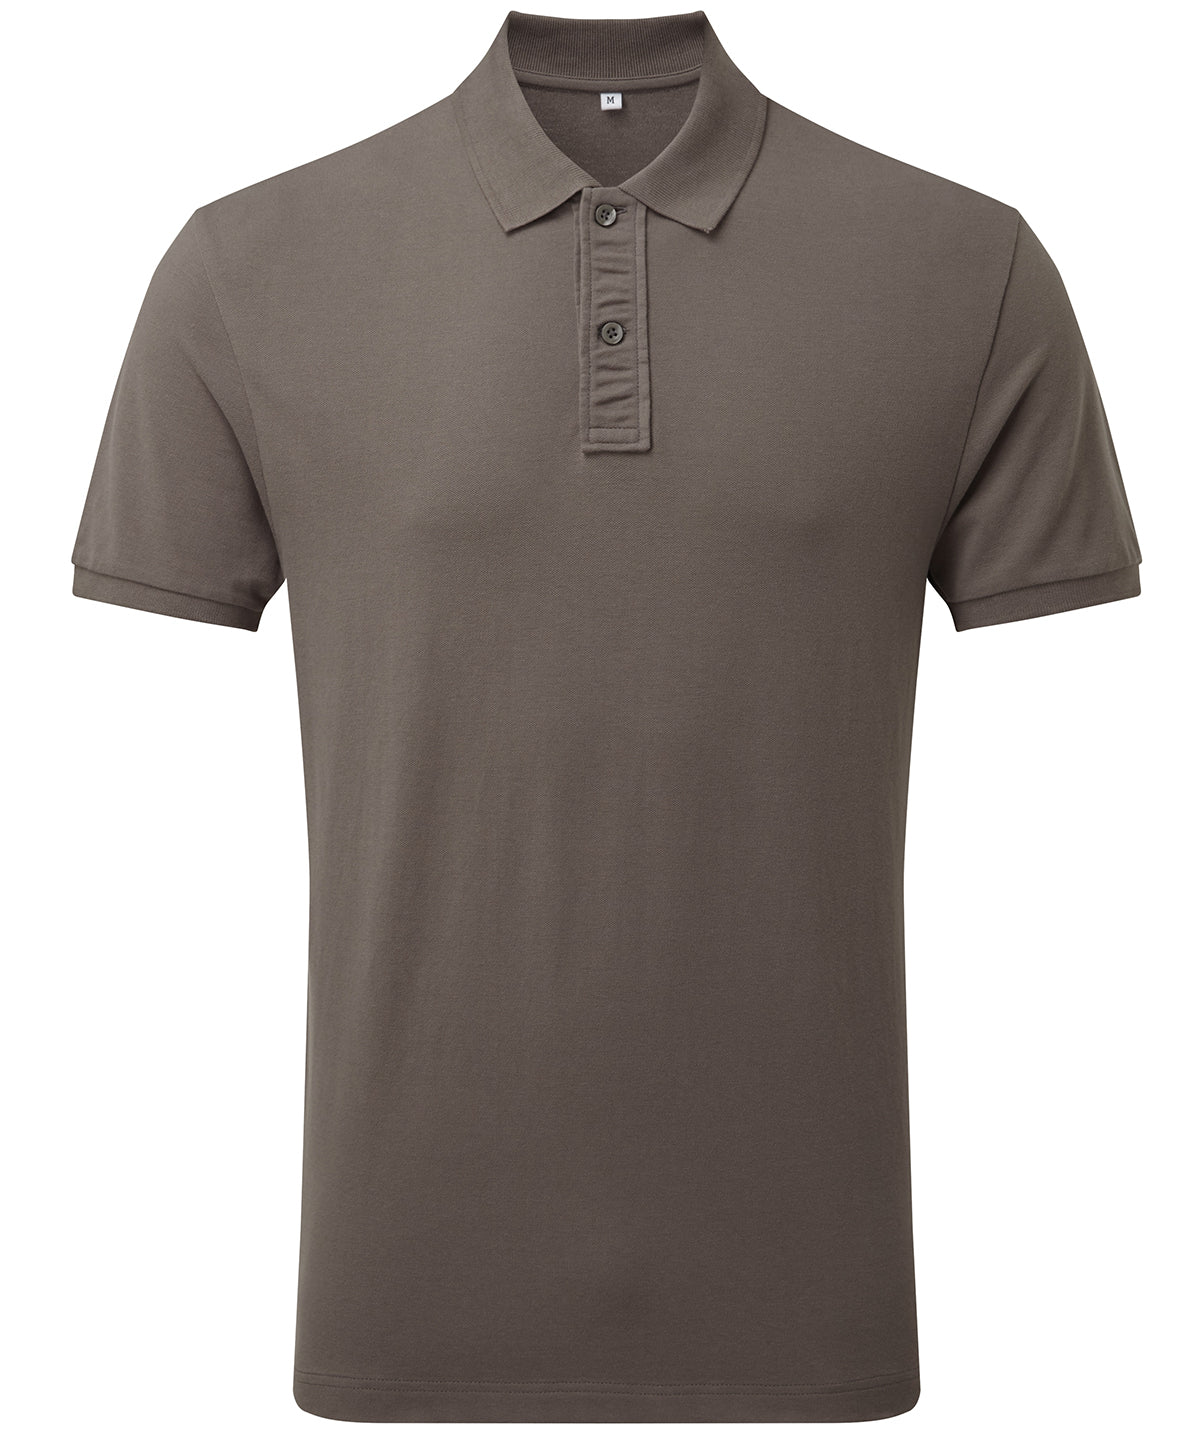 Personalised Polo Shirts - Royal Asquith & Fox Men's "infinity stretch" polo